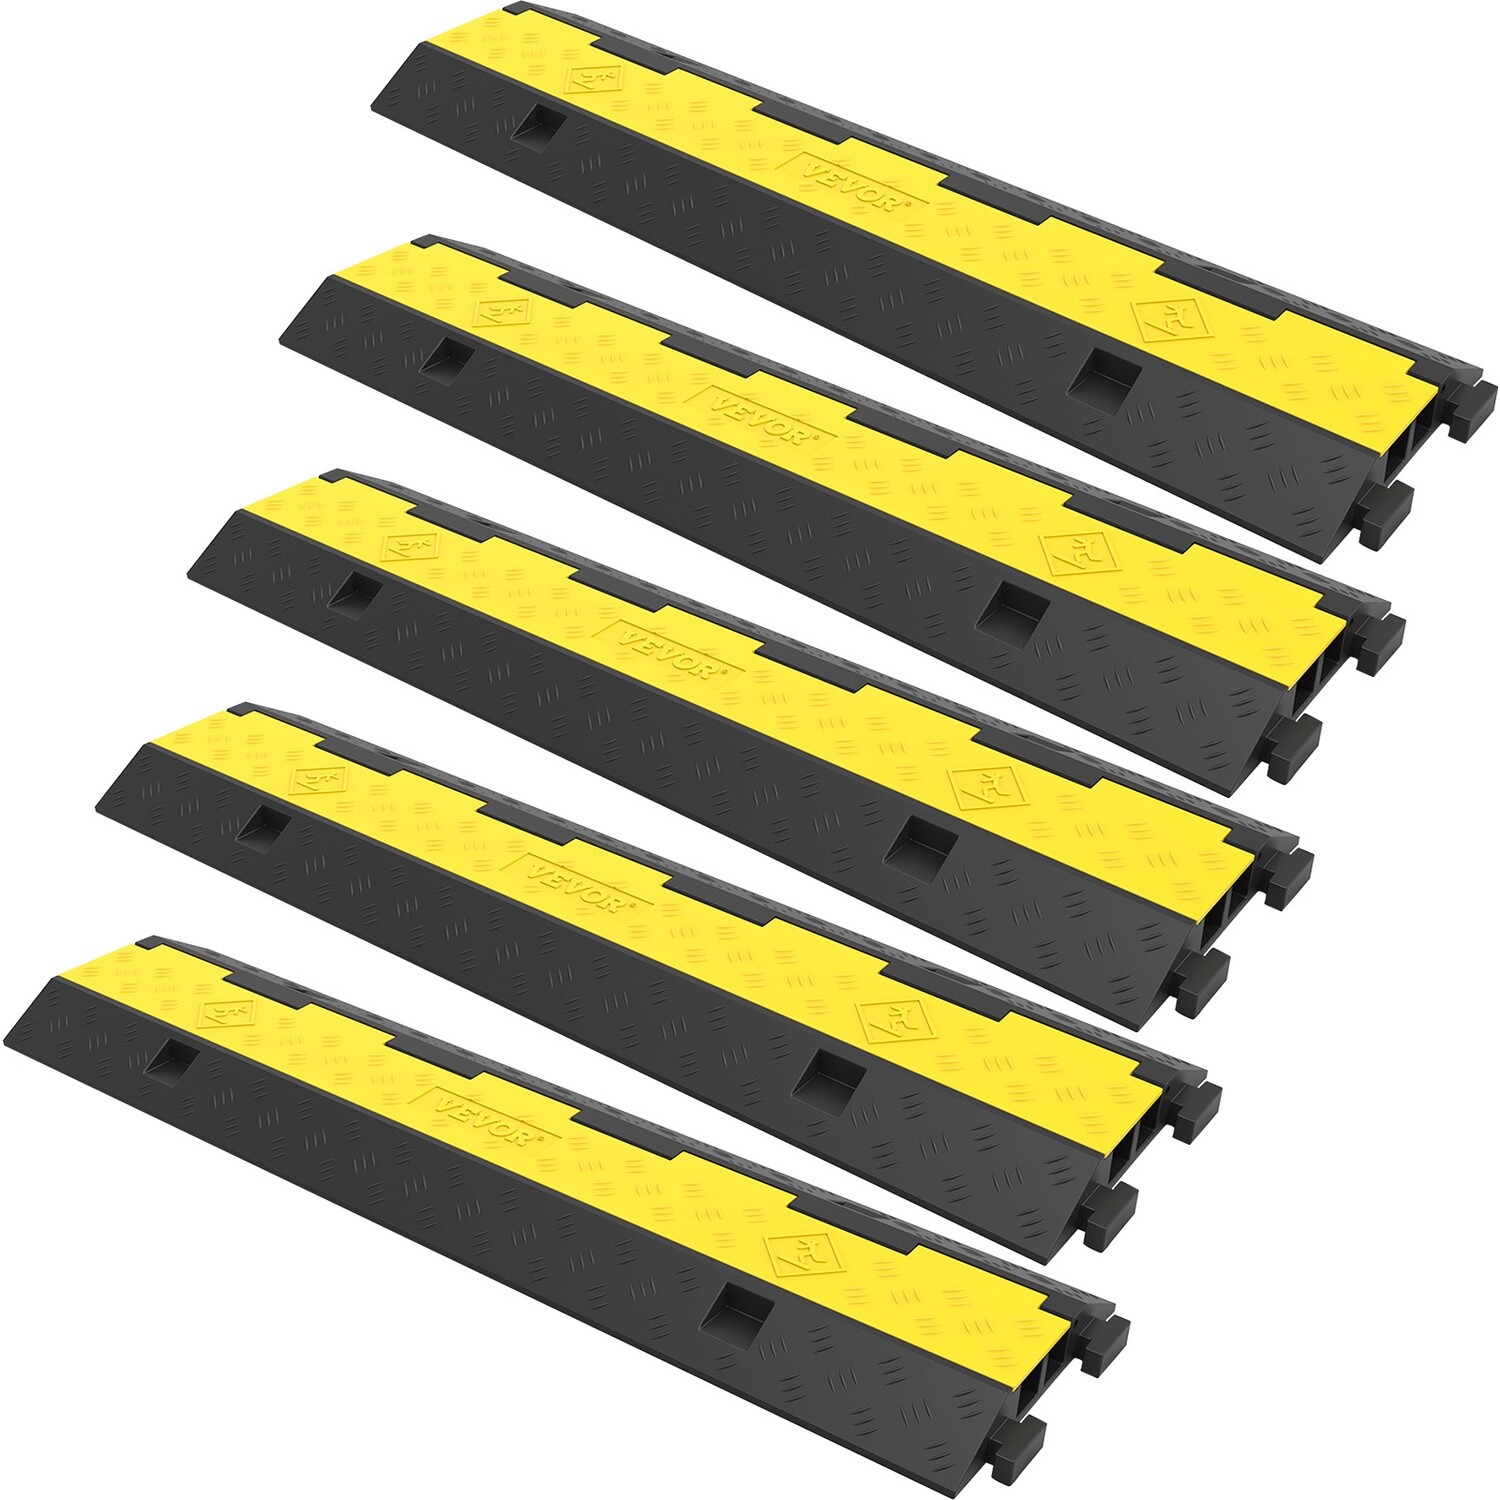 5PCS 2-Cable Rubber Speed Bump Cable Protector Ramp 40"x9.7"x2" Cord Guard